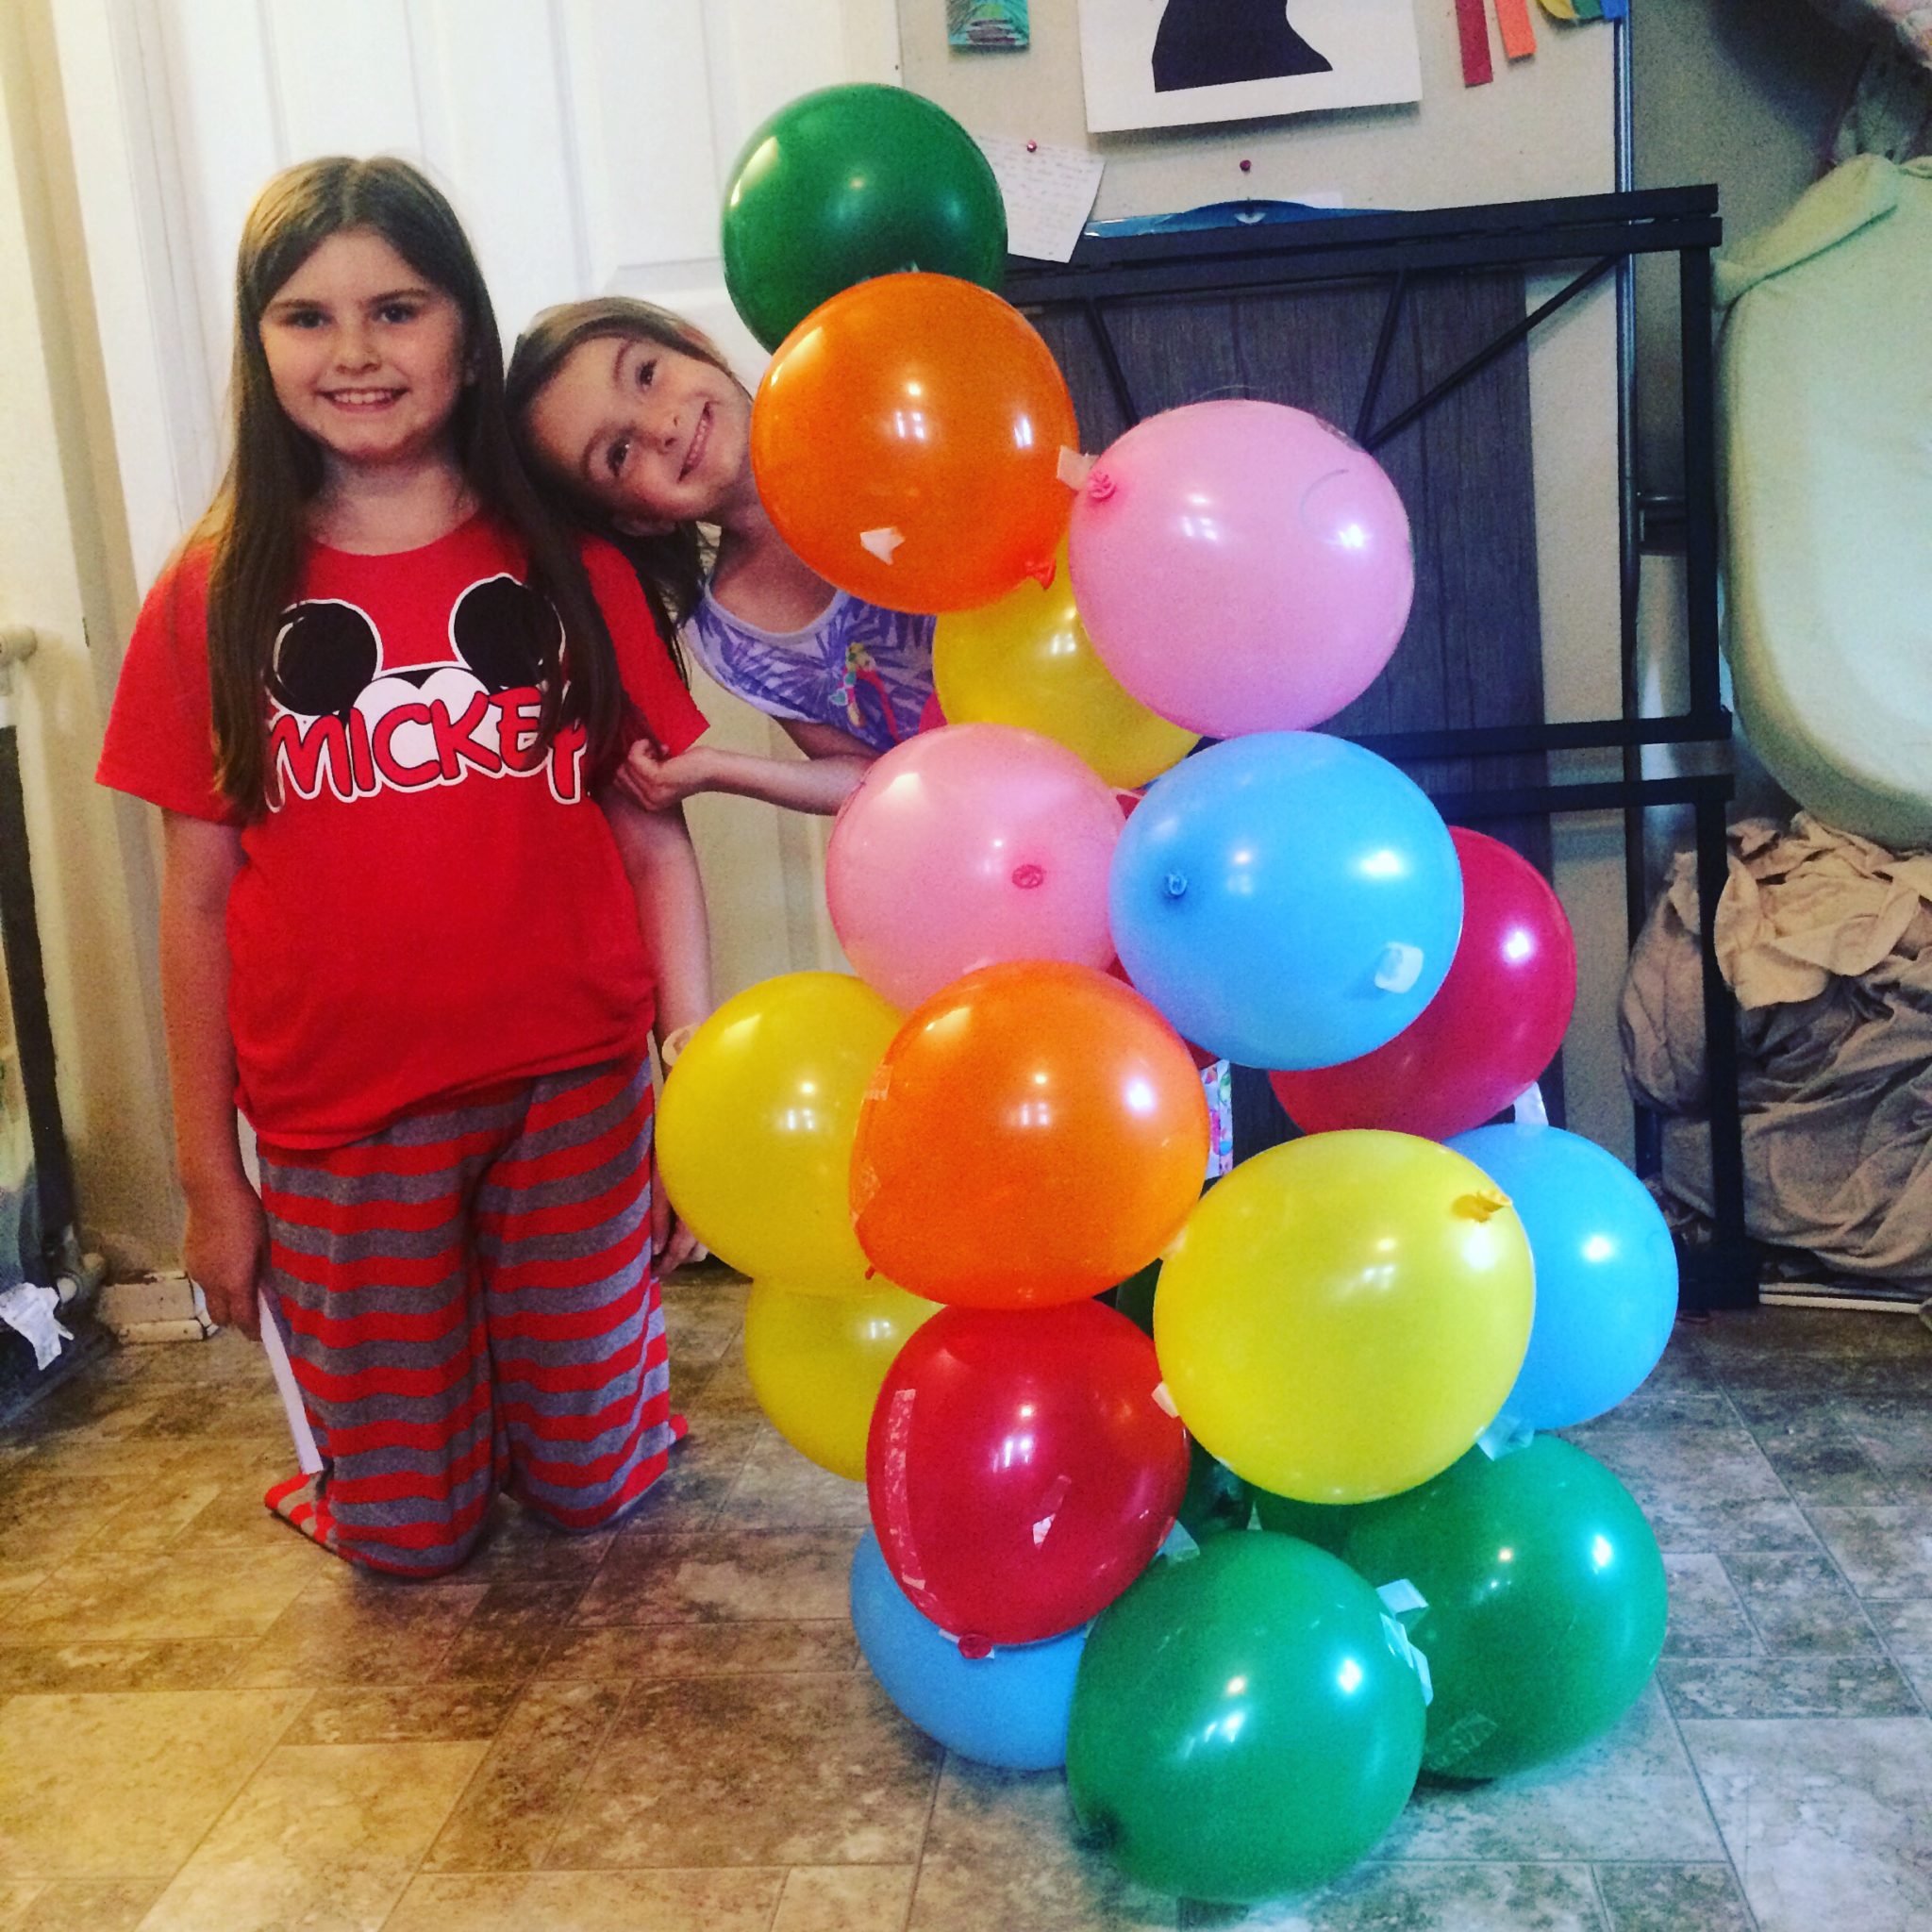 We love STEM Challenges and we totally love Moana! We put the two together and came up with some fun, brain bending STEM challenges that young kids will surely enjoy from OurFamilyCode.com! Check out this awesome balloon tower challenge and grab your free printable Moana STEM challenge cards! #ourfamilycode #freebie #freeprintable #moana #disneymoana #STEMchallenges #MoanaSTEMchallenge #girlsinSTEM #kidcoders #easySTEMchallenges